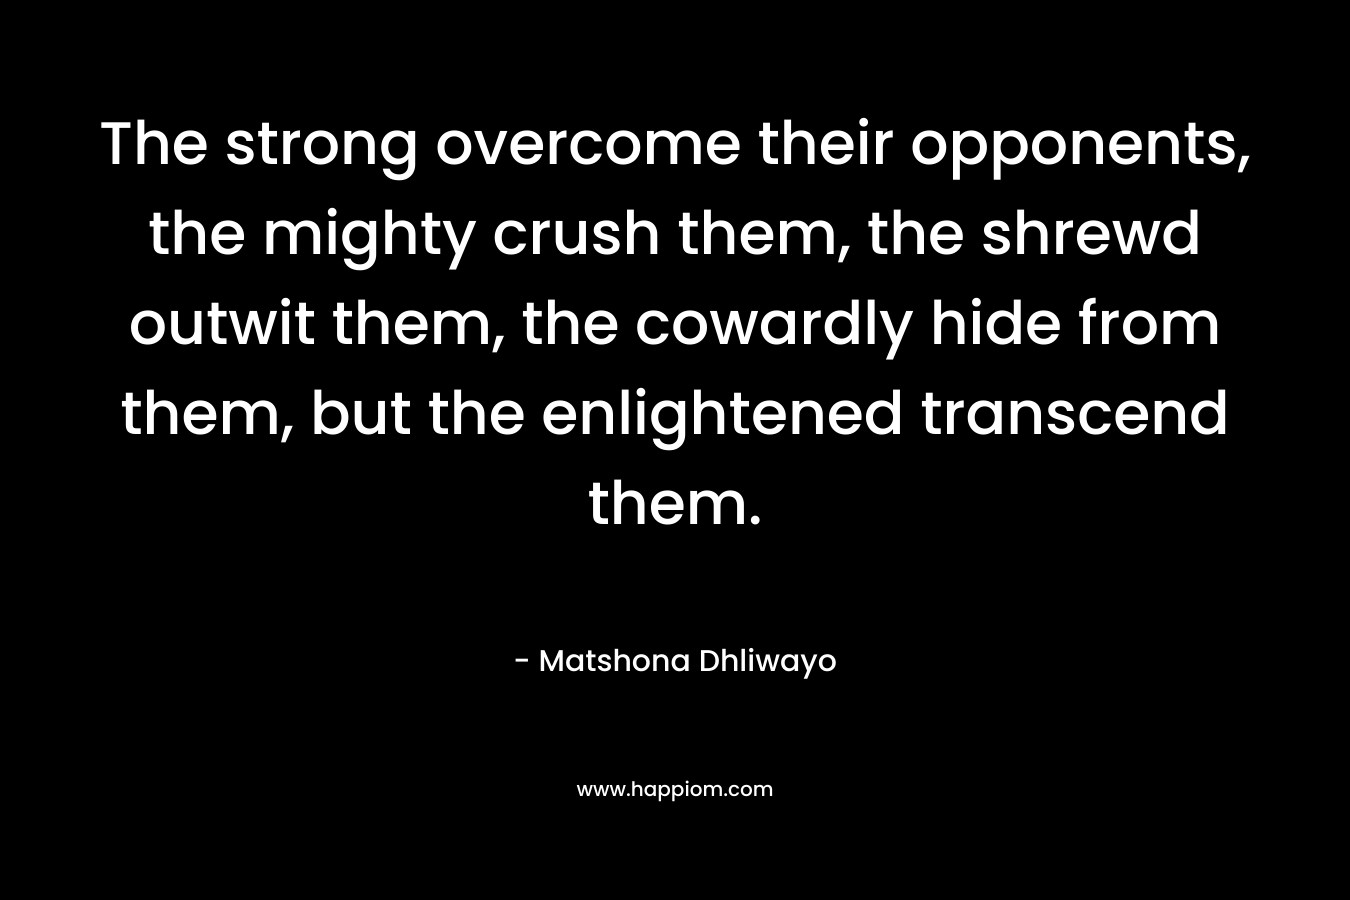 The strong overcome their opponents, the mighty crush them, the shrewd outwit them, the cowardly hide from them, but the enlightened transcend them. – Matshona Dhliwayo